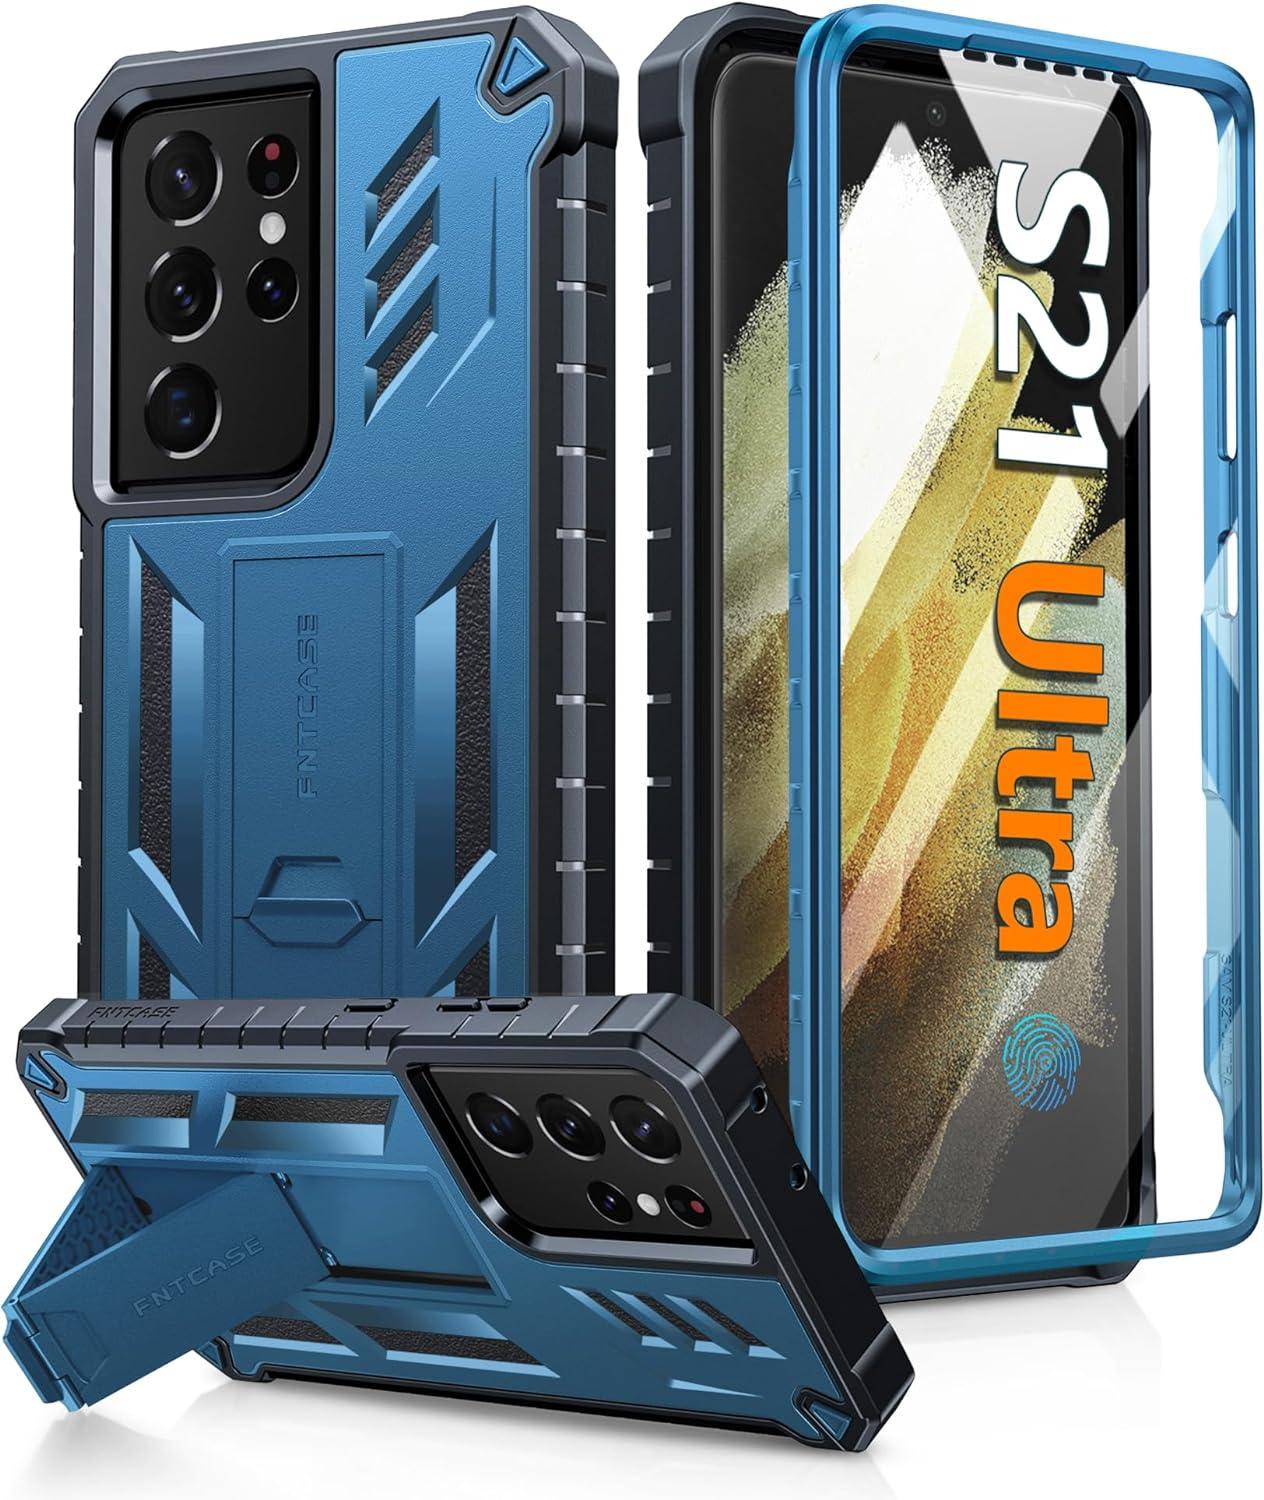 Galaxy S21 Ultra Case: Military Grade Rugged Shockproof Protective Case with Built-in Screen Protector and Kickstand - FNTCASE OFFICIAL